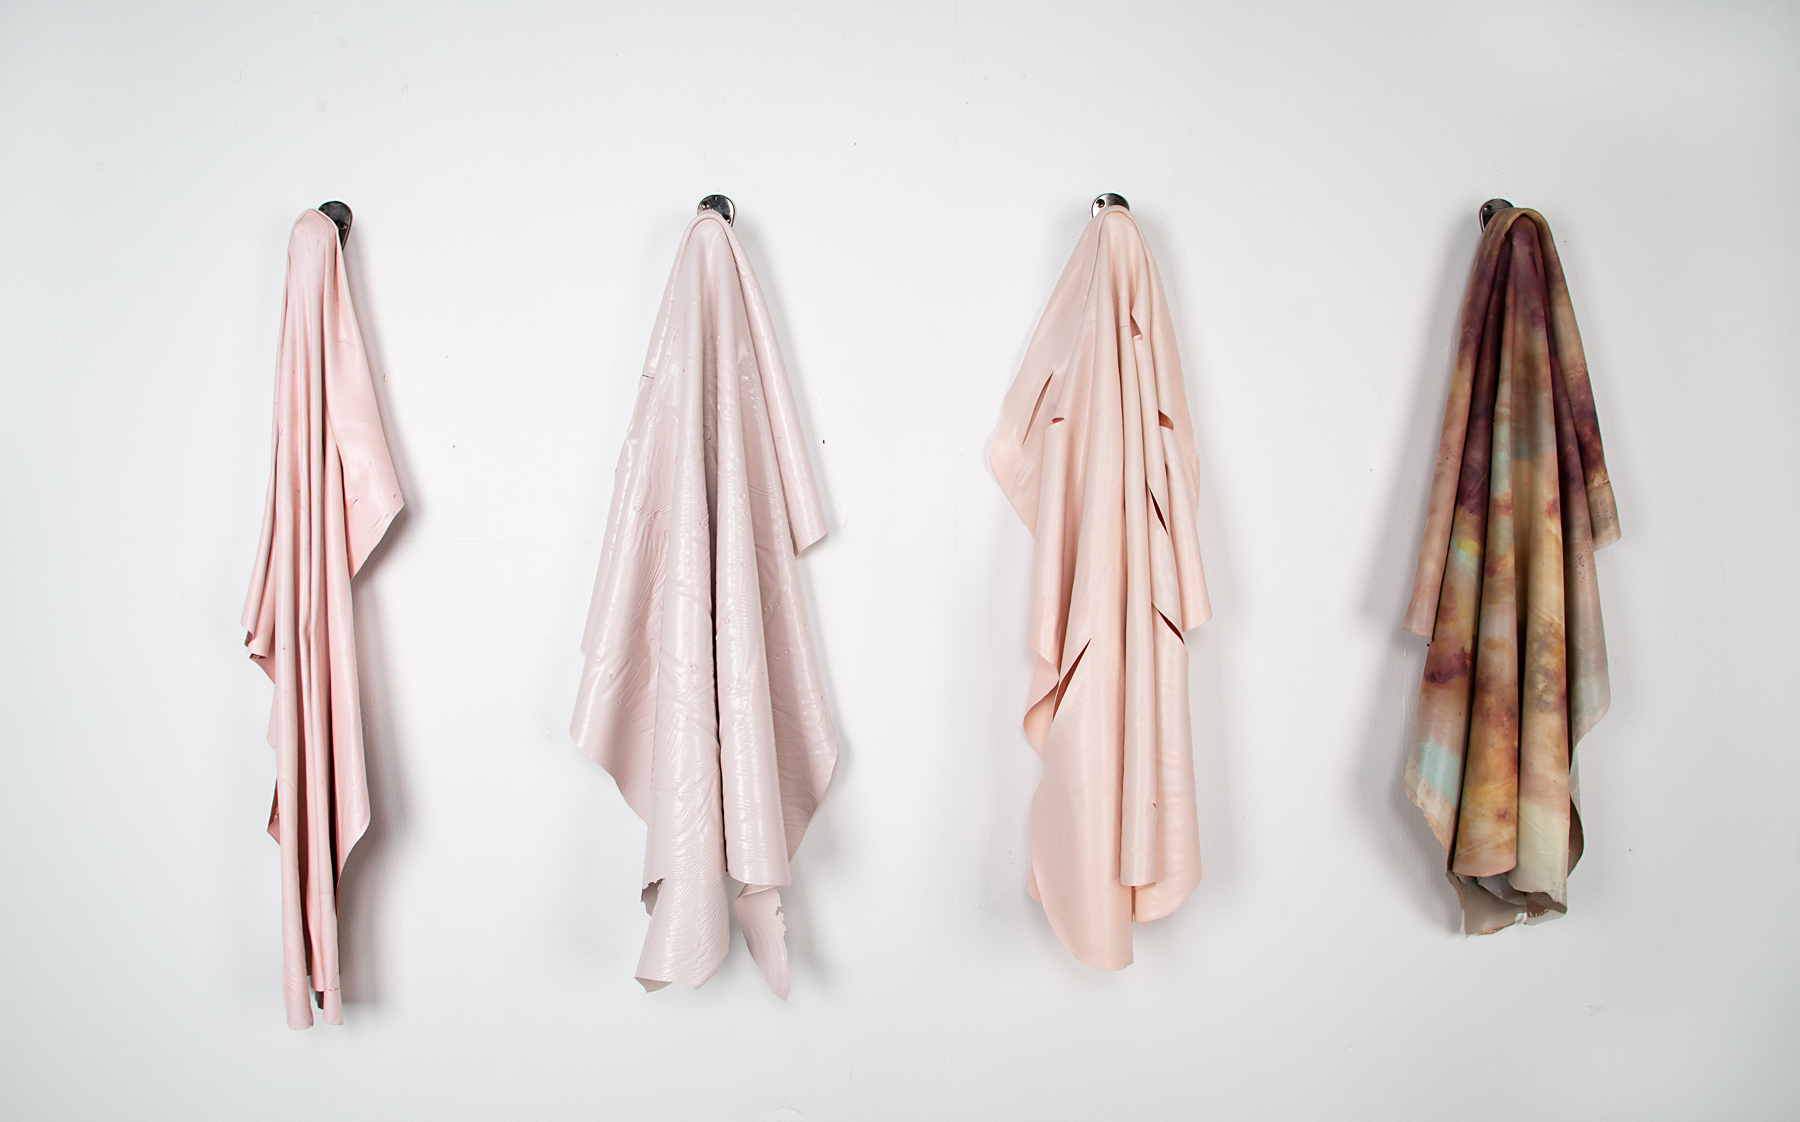 Four textiles hang on equally spaced hooks on a white wall. The first three textiles are shades of pink and the final one is various shades of brown.